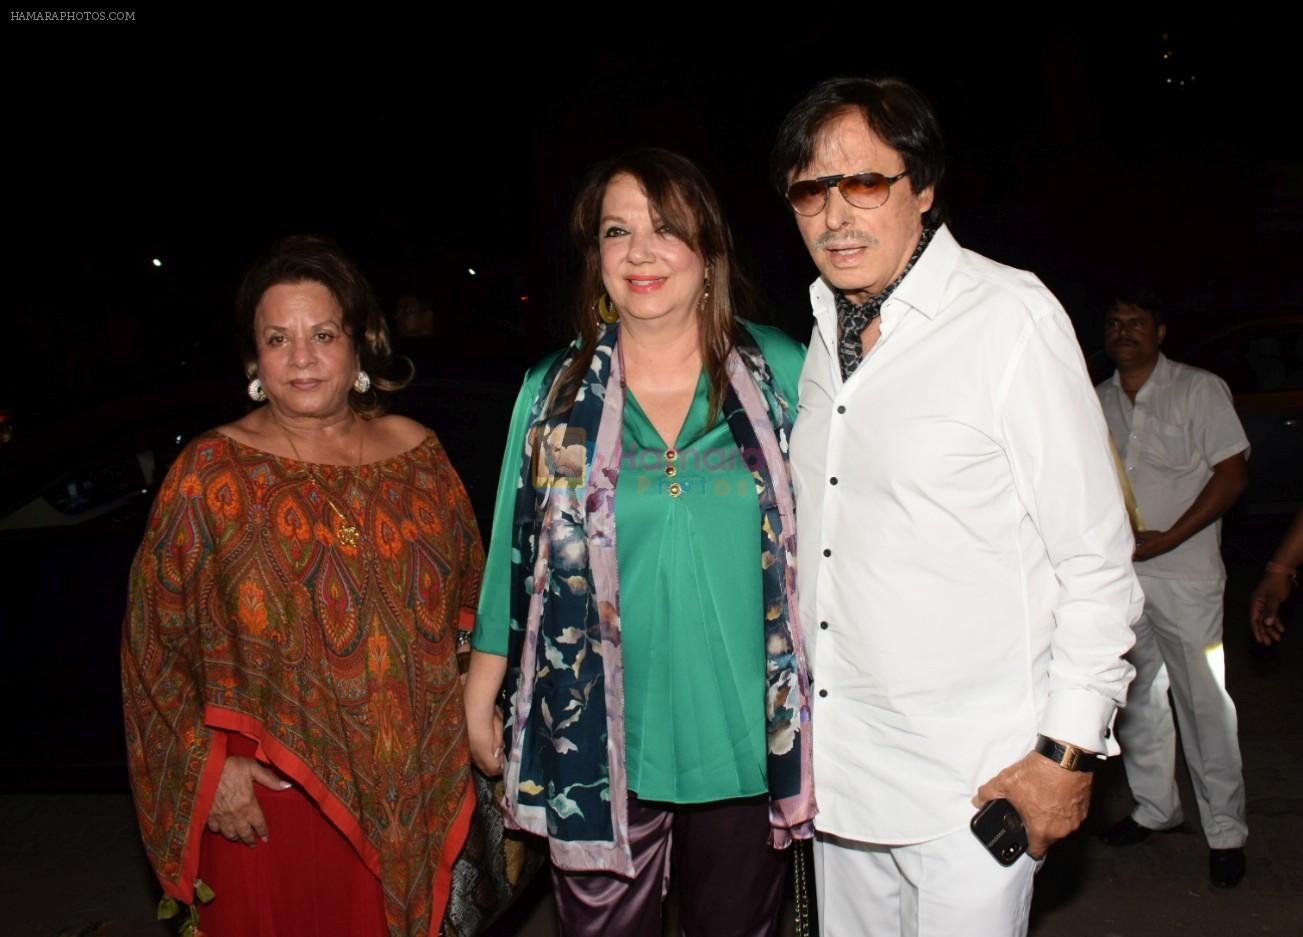 Sanjay Khan, Zarine Khan At The Launch Of Bespoke Home Jewels By Minjal Jhaveri on 13th April 2018